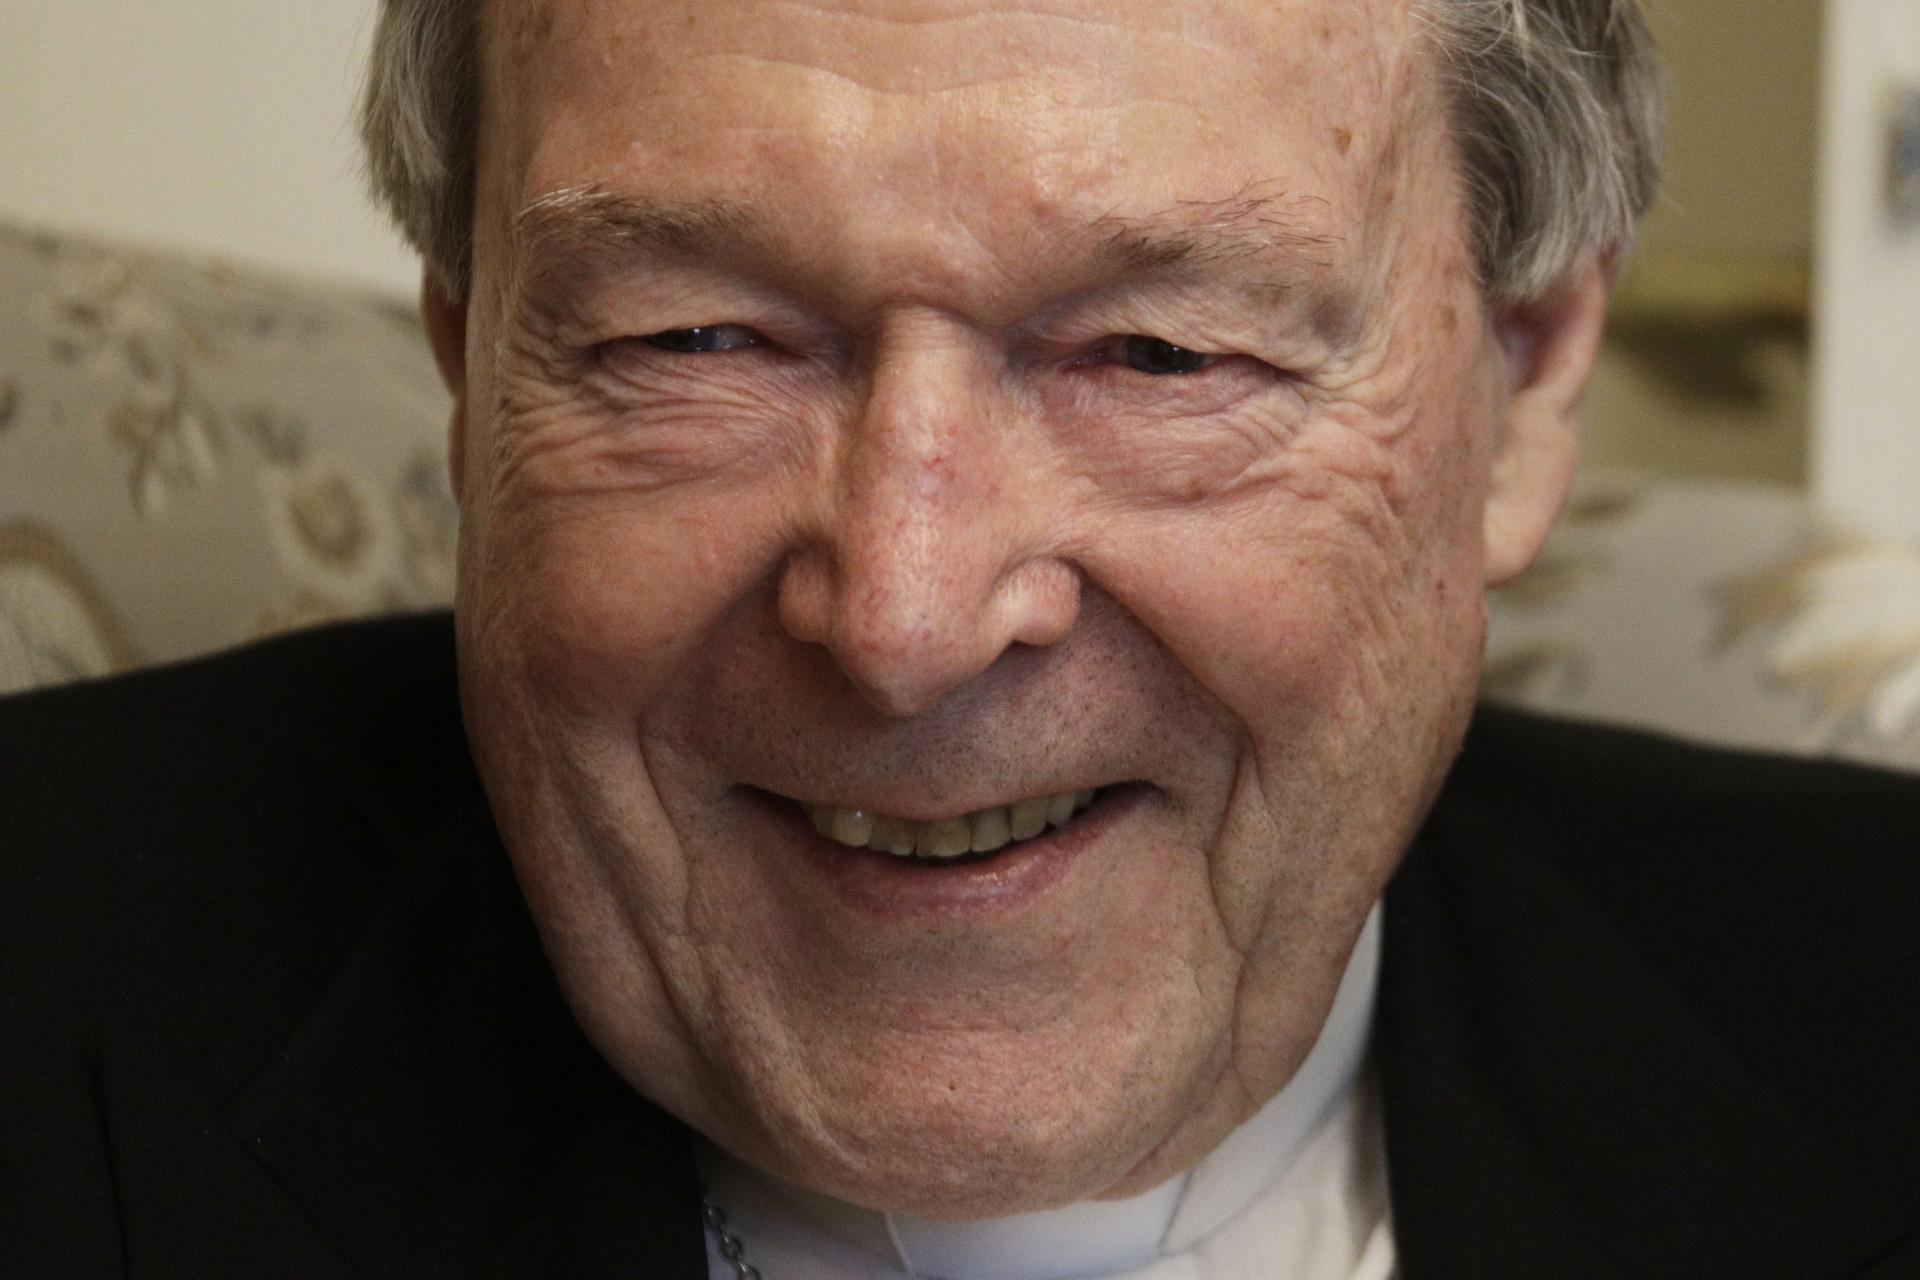 Pell remembered as ‘deeply polarizing’ but ardent warrior for Christ